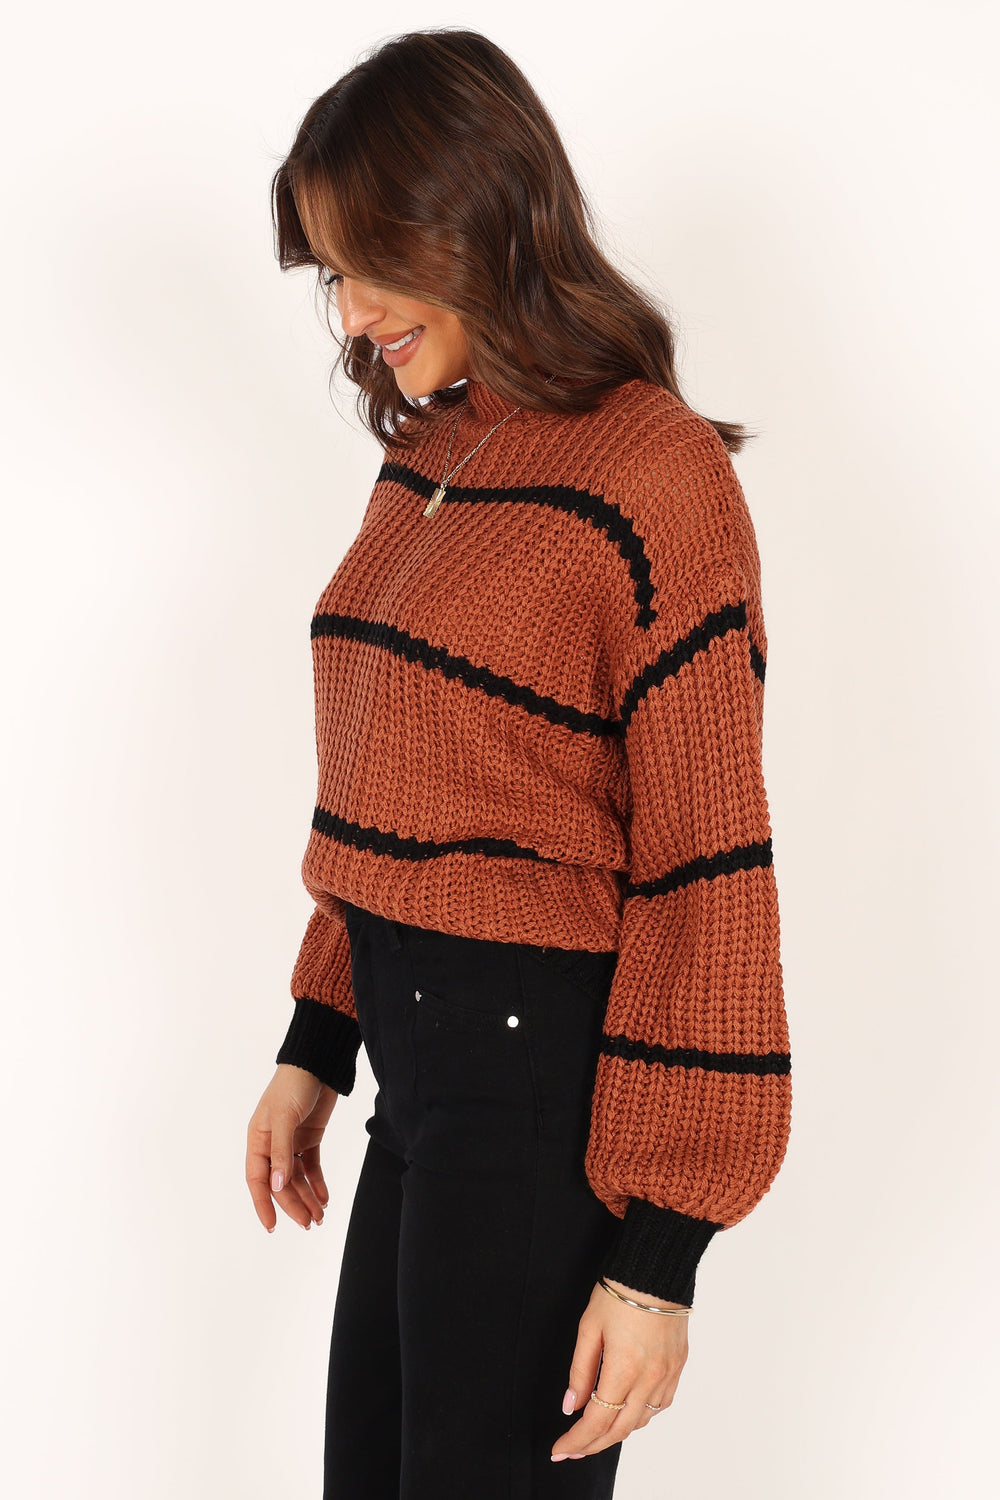 Petal and Pup USA Knitwear Magdalena Striped Knit Sweater - Brown